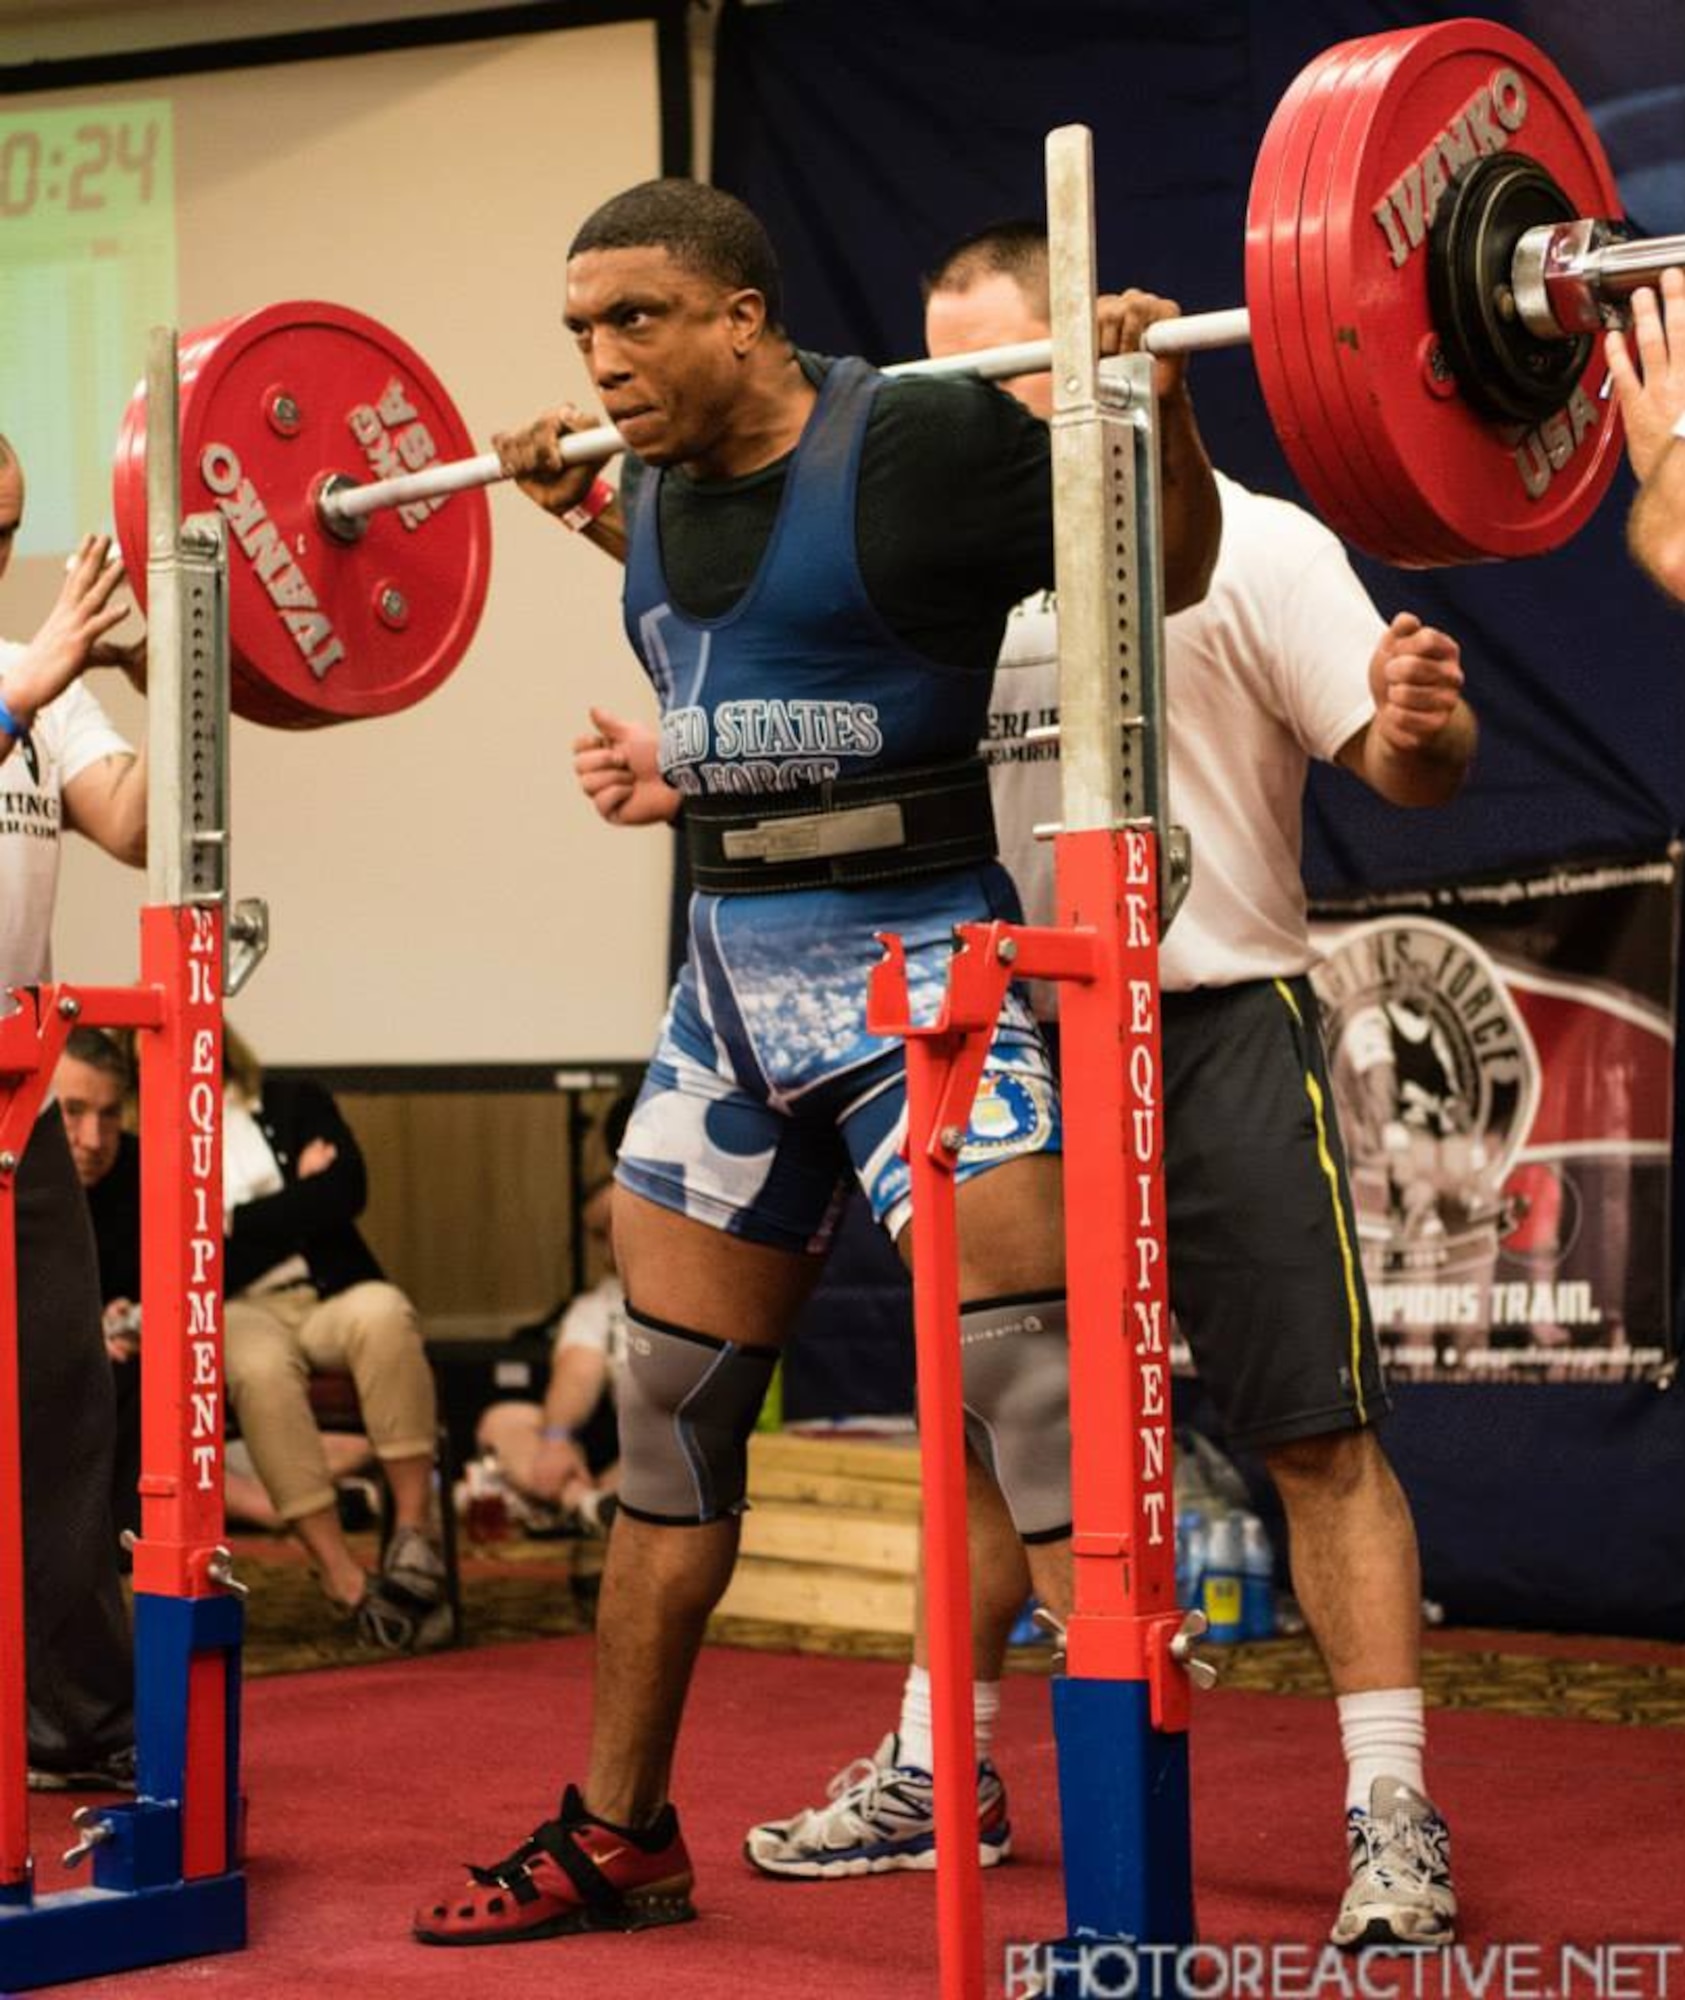 Tech. Sgt. Michael L. Parrott, Headquarters Air Force Recruiting Service, was a member  of the Air Force Powerlifting Team that won the silver at the 2015 USAPL Military Nationals and Southeastern State Bench Competition in Atlanta March 14, 2015. (Courtesy photo)